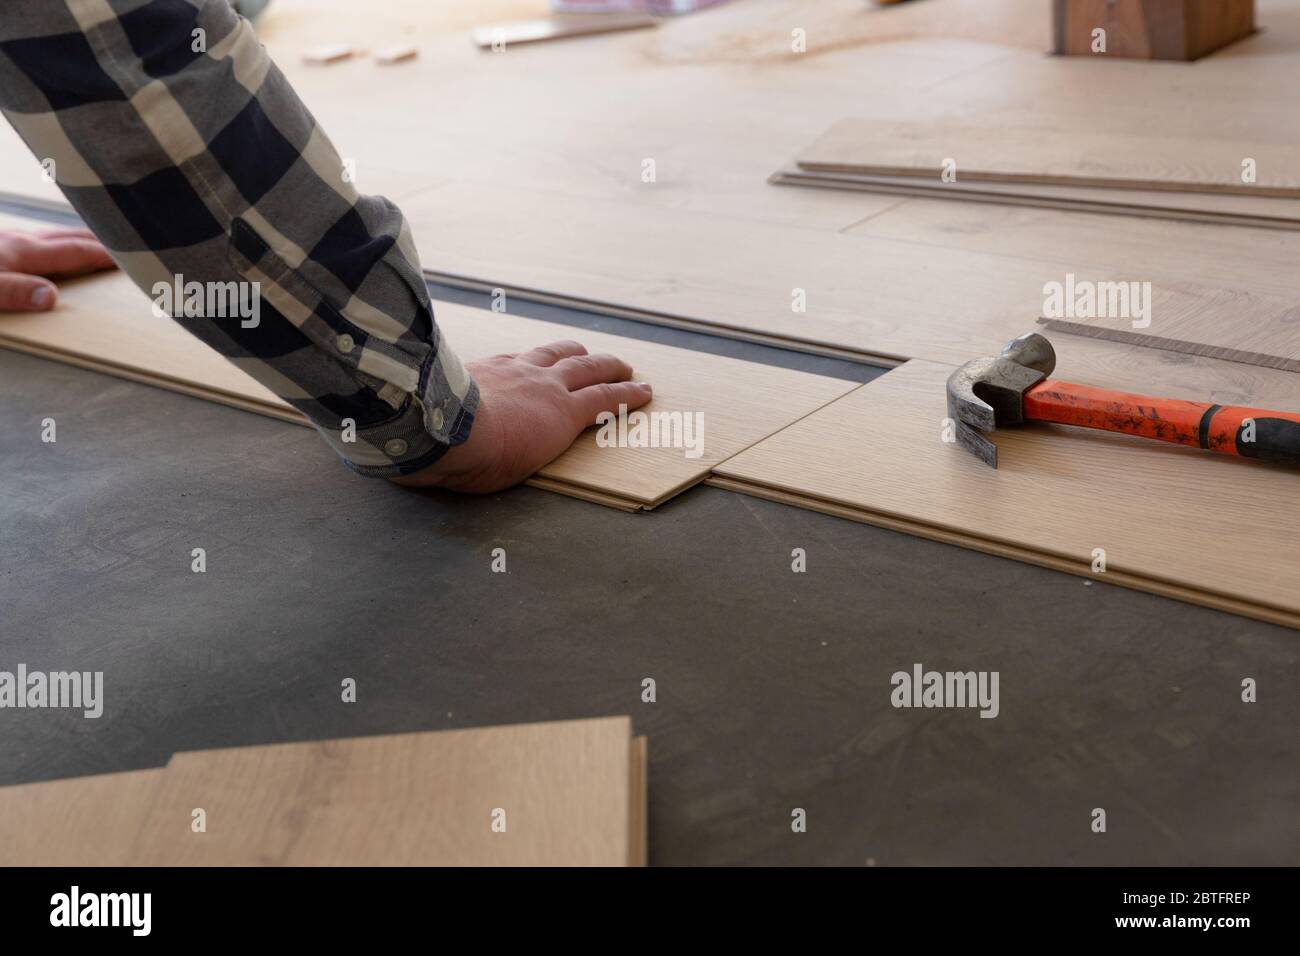 Construction worker installing laminate floor in a new renovated attic. Home improvement concept. Stock Photo